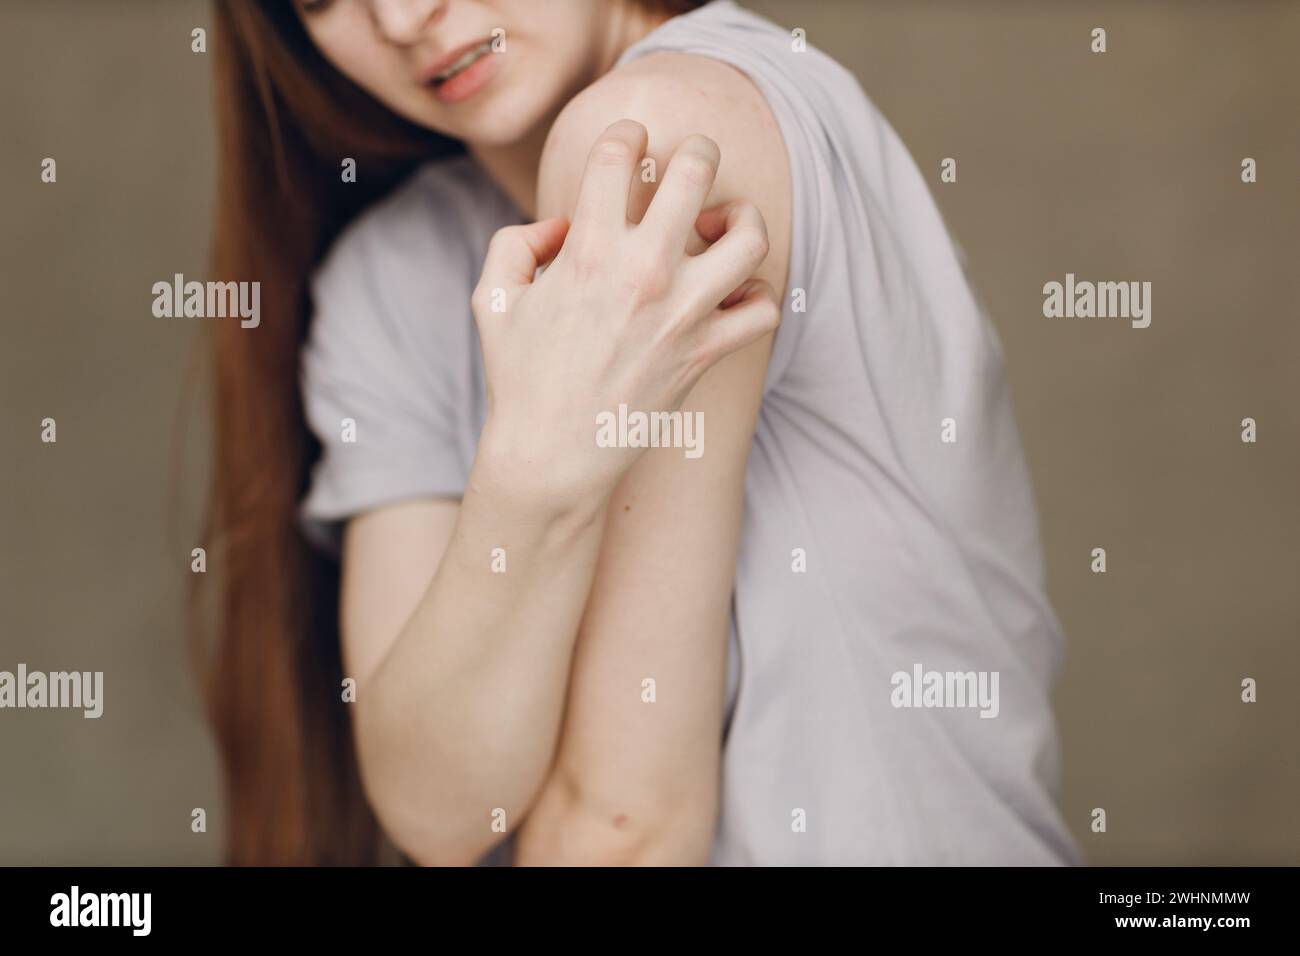 Allergy dermatology scabies itches skin problem woman Stock Photo